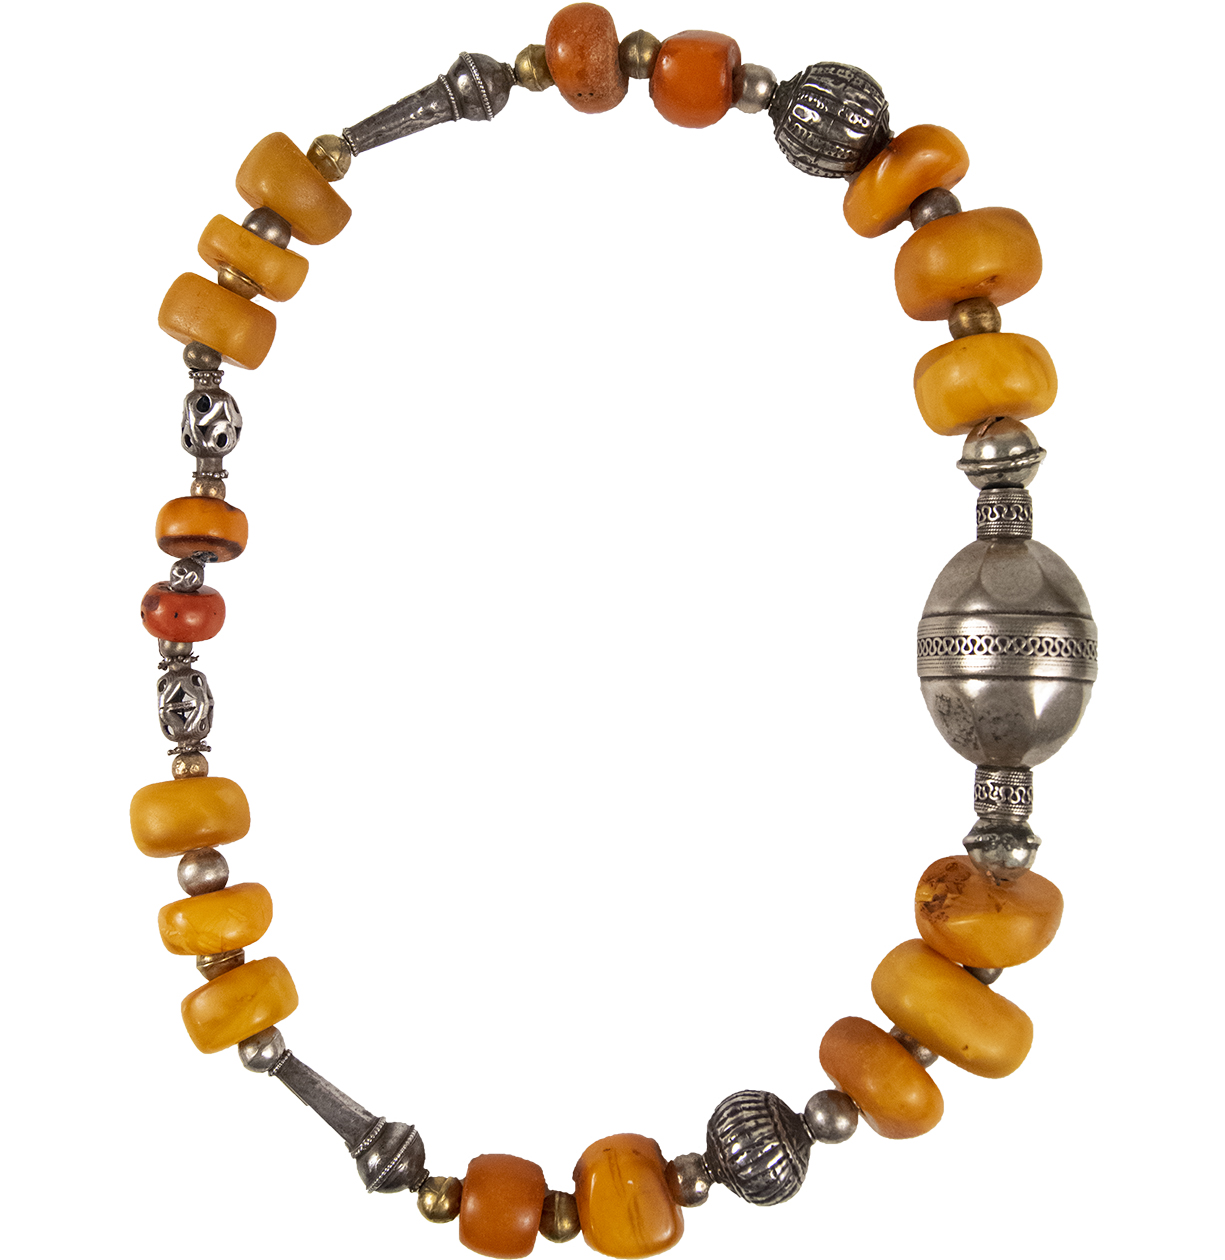 Details about   Berber amber necklace,strand Amber Moroccan vintage Handcrafted Jewelry.07 